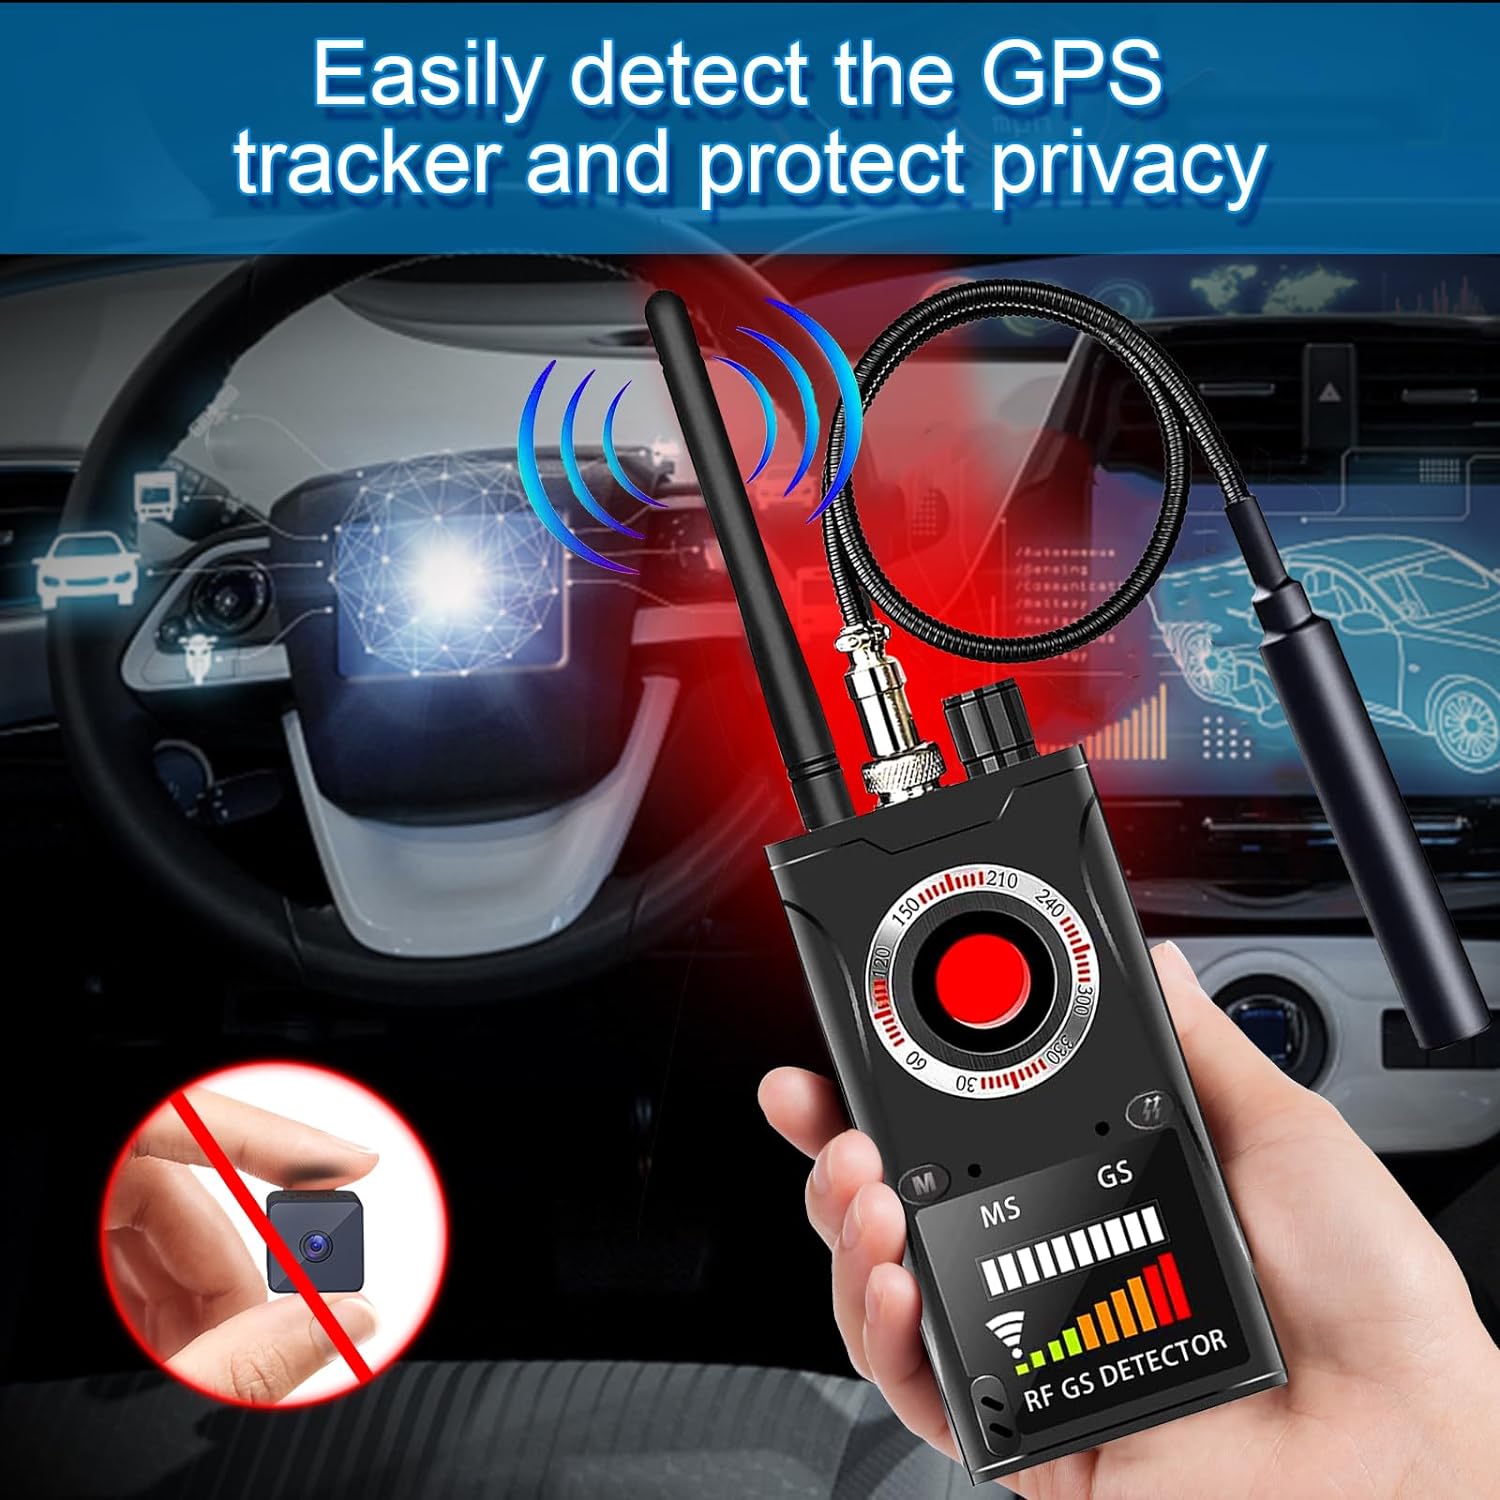 LUVISEE Hidden Camera Detector Anti Spy RF Signal Detector Bug Detector, Camera Finder Scanner, GPS Tracker Detector, Protect Privacy Counter Surveillance Equipment New Intelligent Infrared Detection